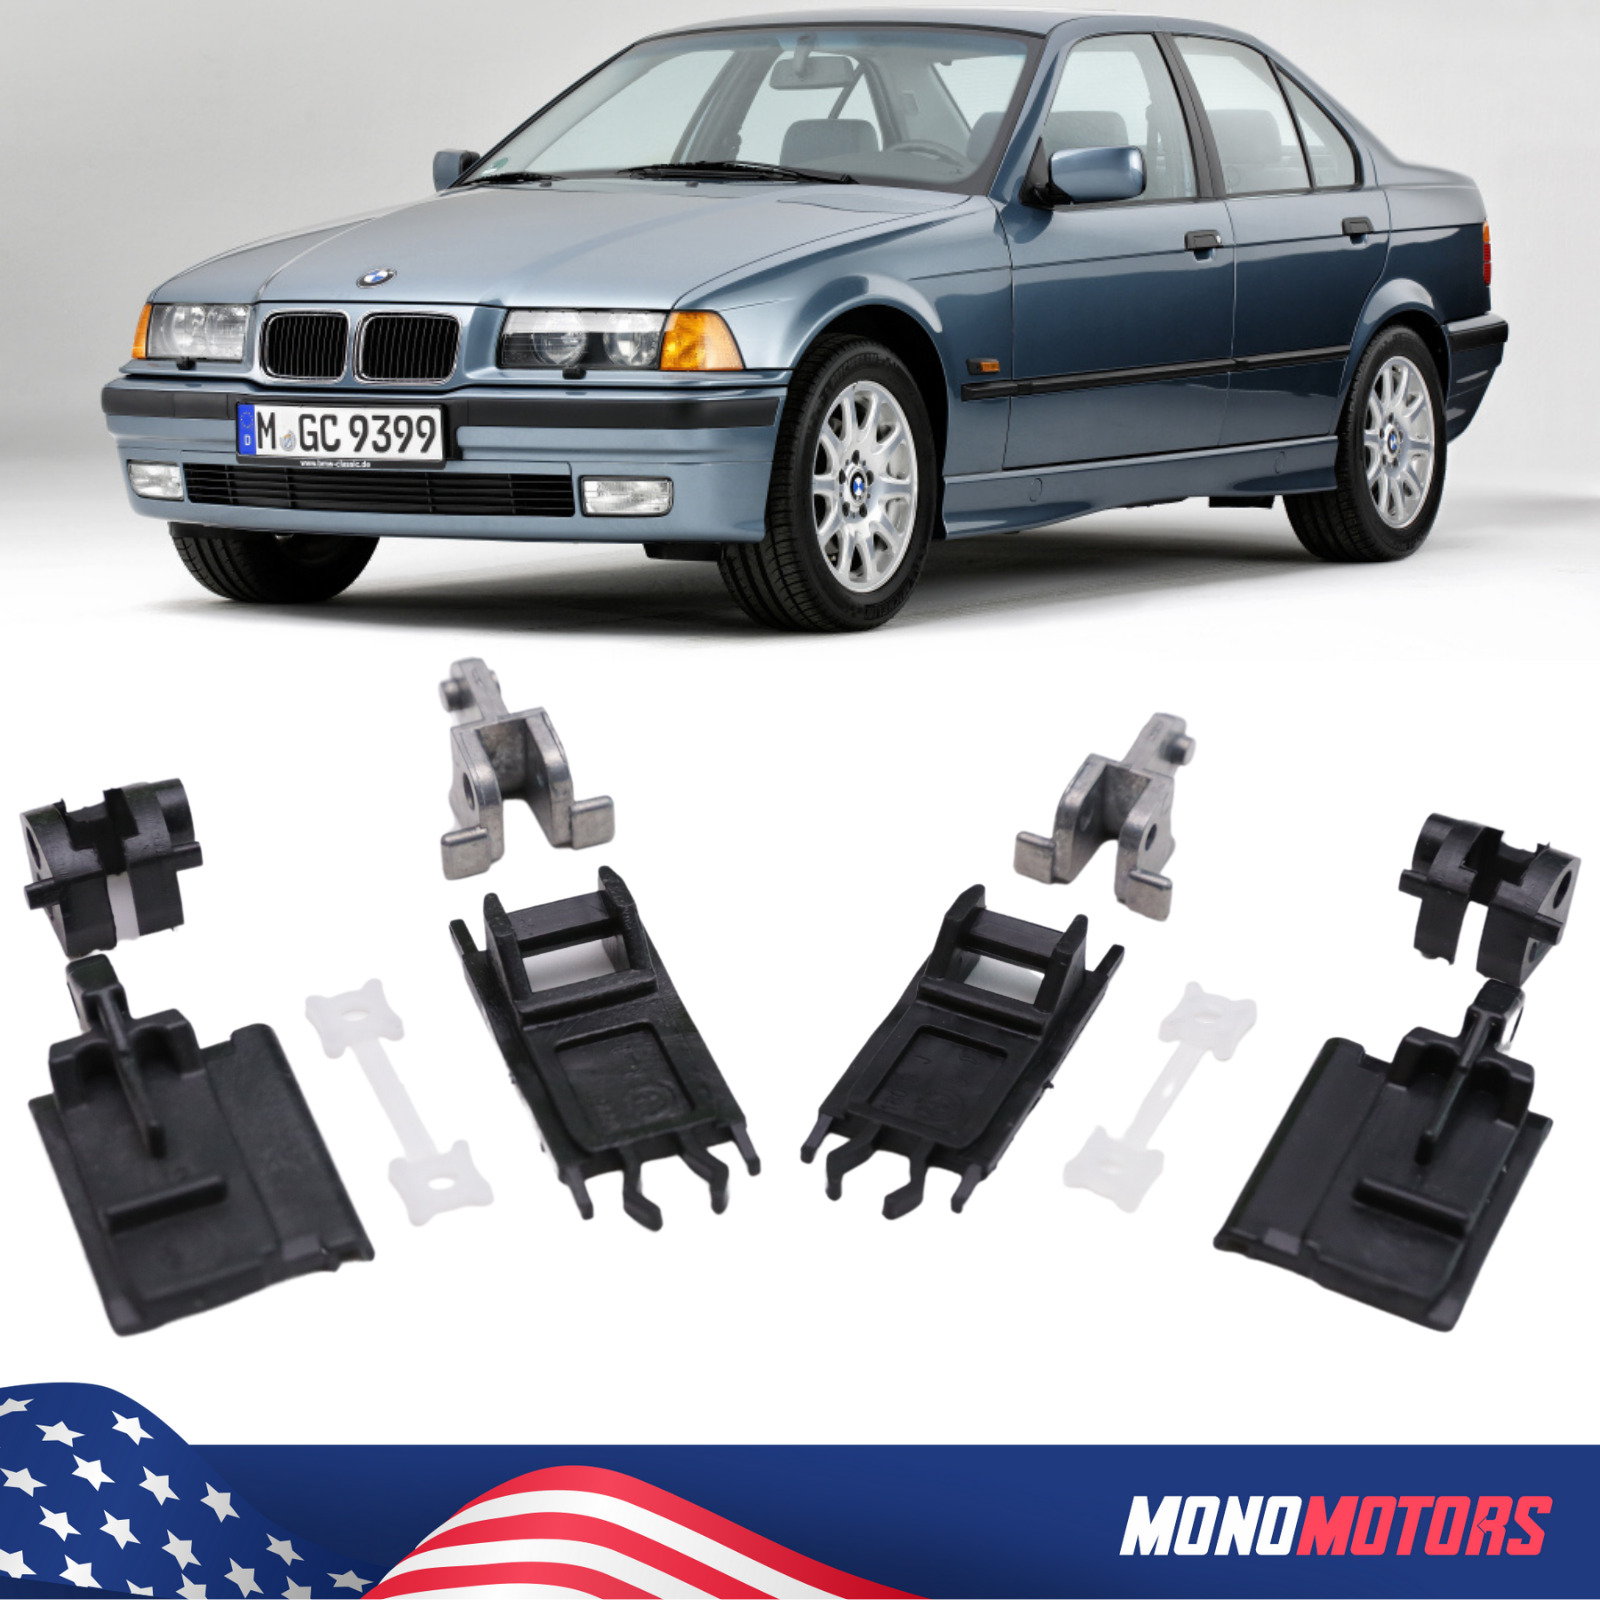 SUNROOF REPAIR KIT for BMW 3 SERIES E36 RIGHT LEFT SET FREE 3-5 DAYS DELIVERY